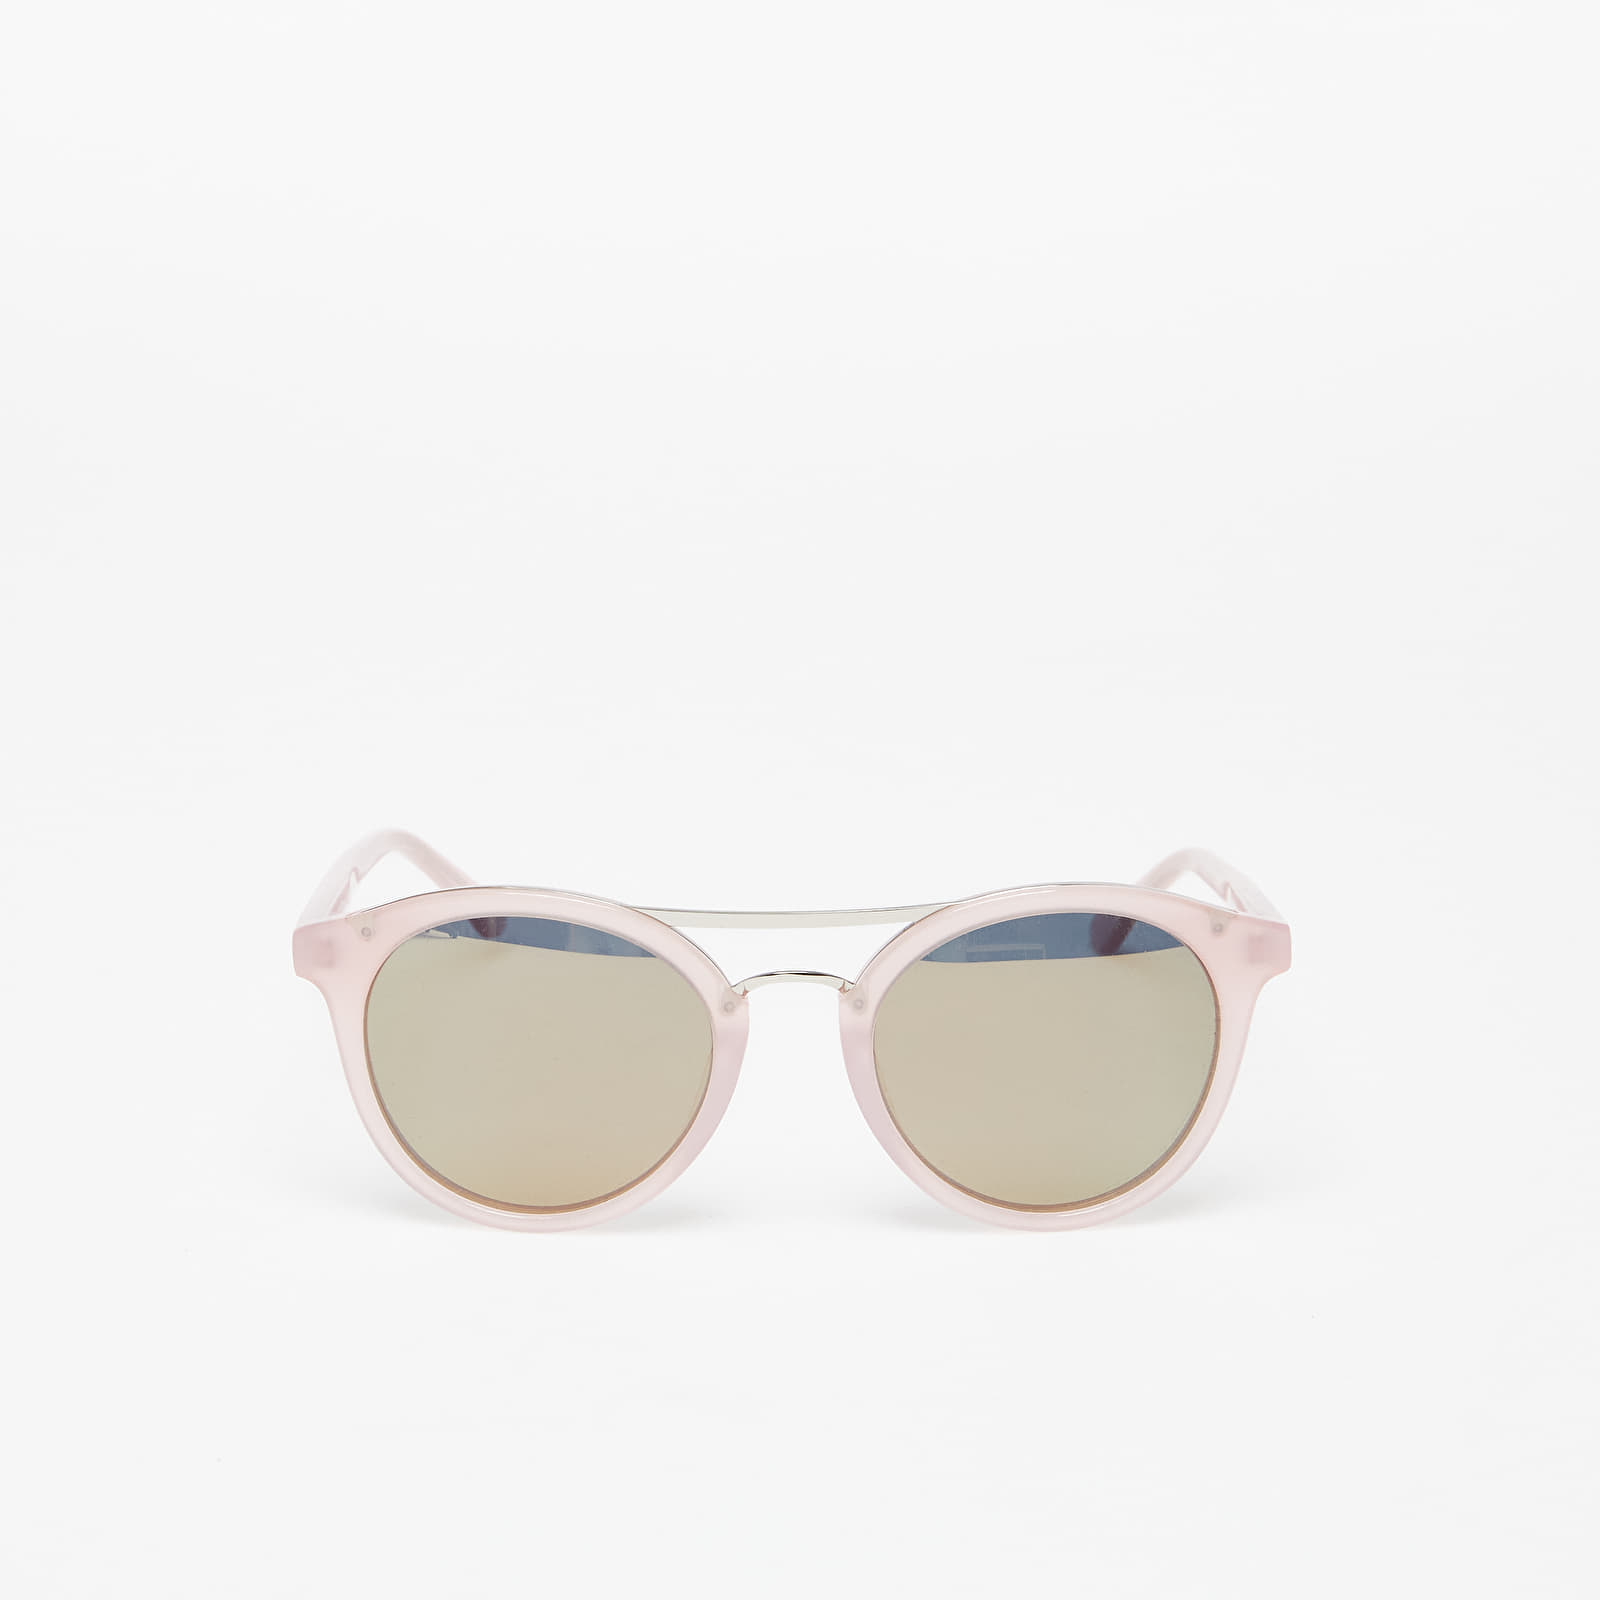 Sunglasses Horsefeathers Nomad Sunglasses Gloss Rose/Mirror Champagne